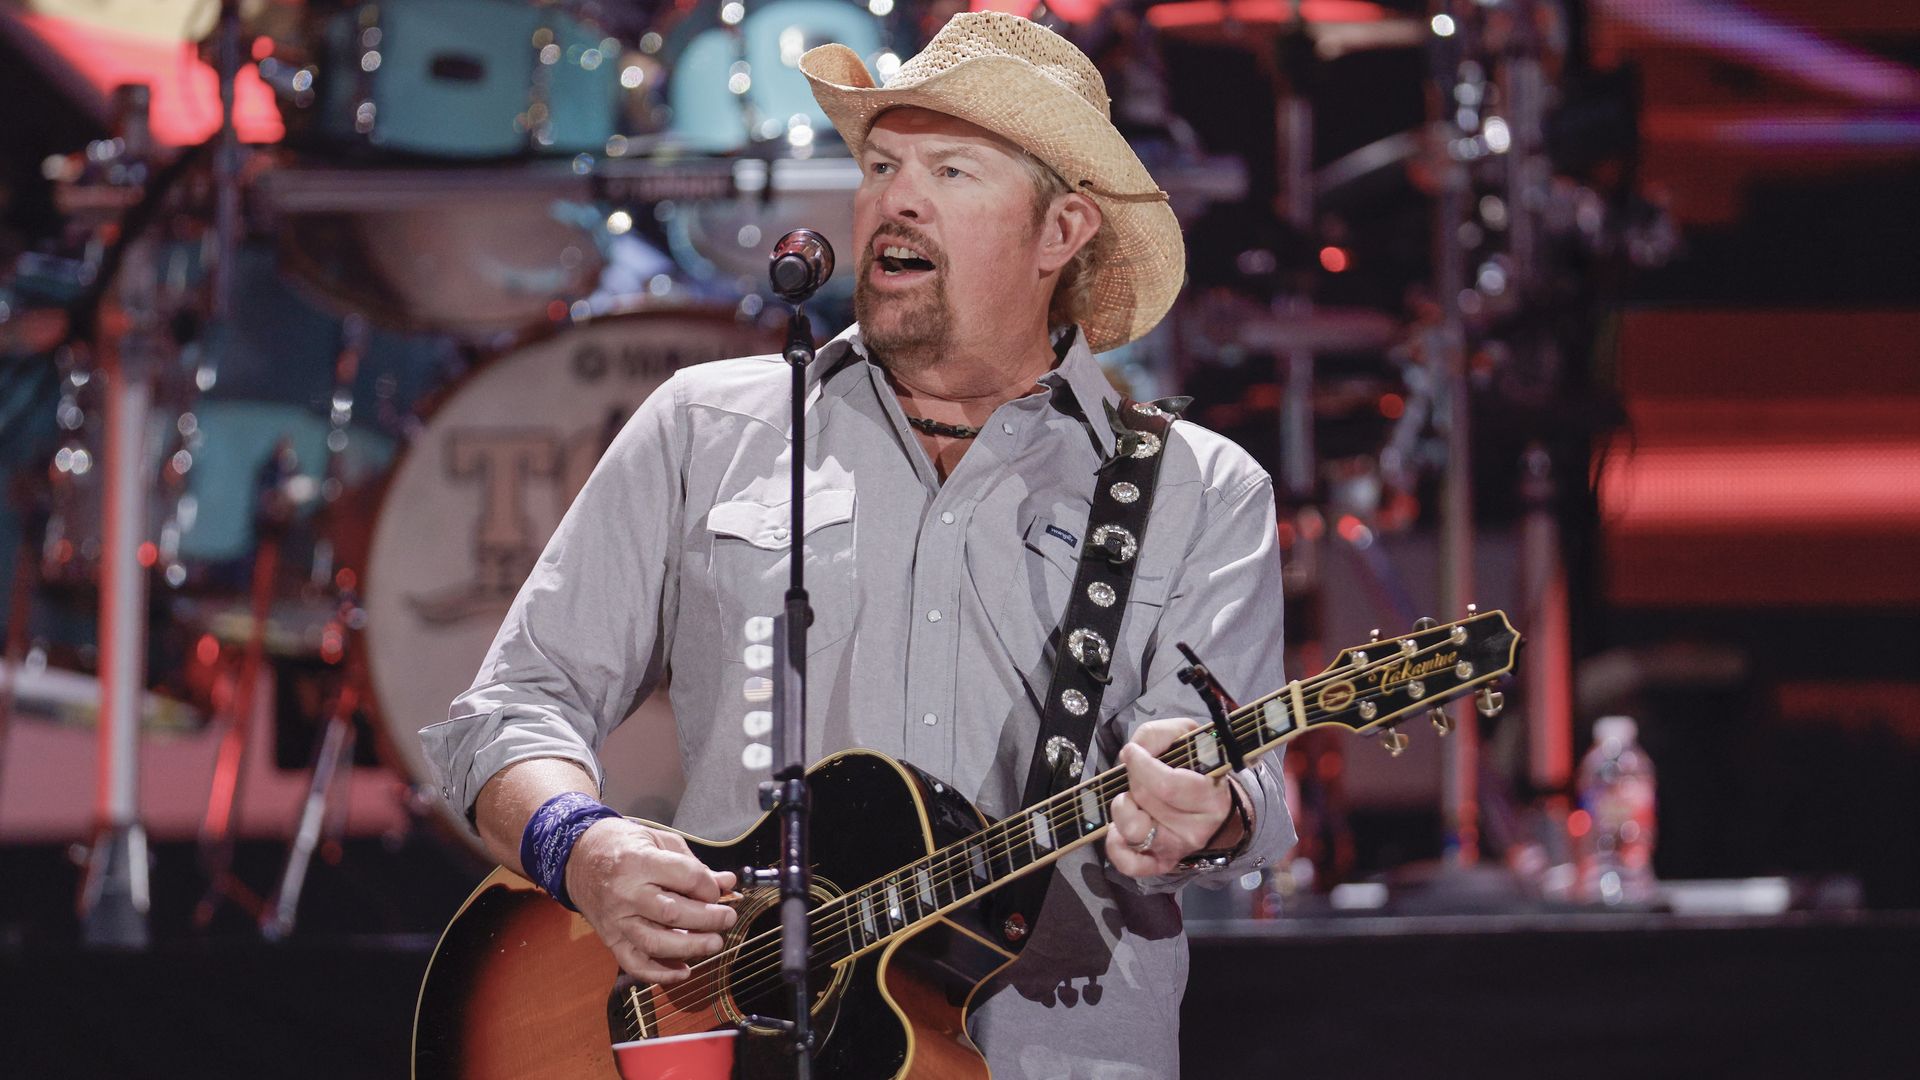 Toby Keith performs on stage.